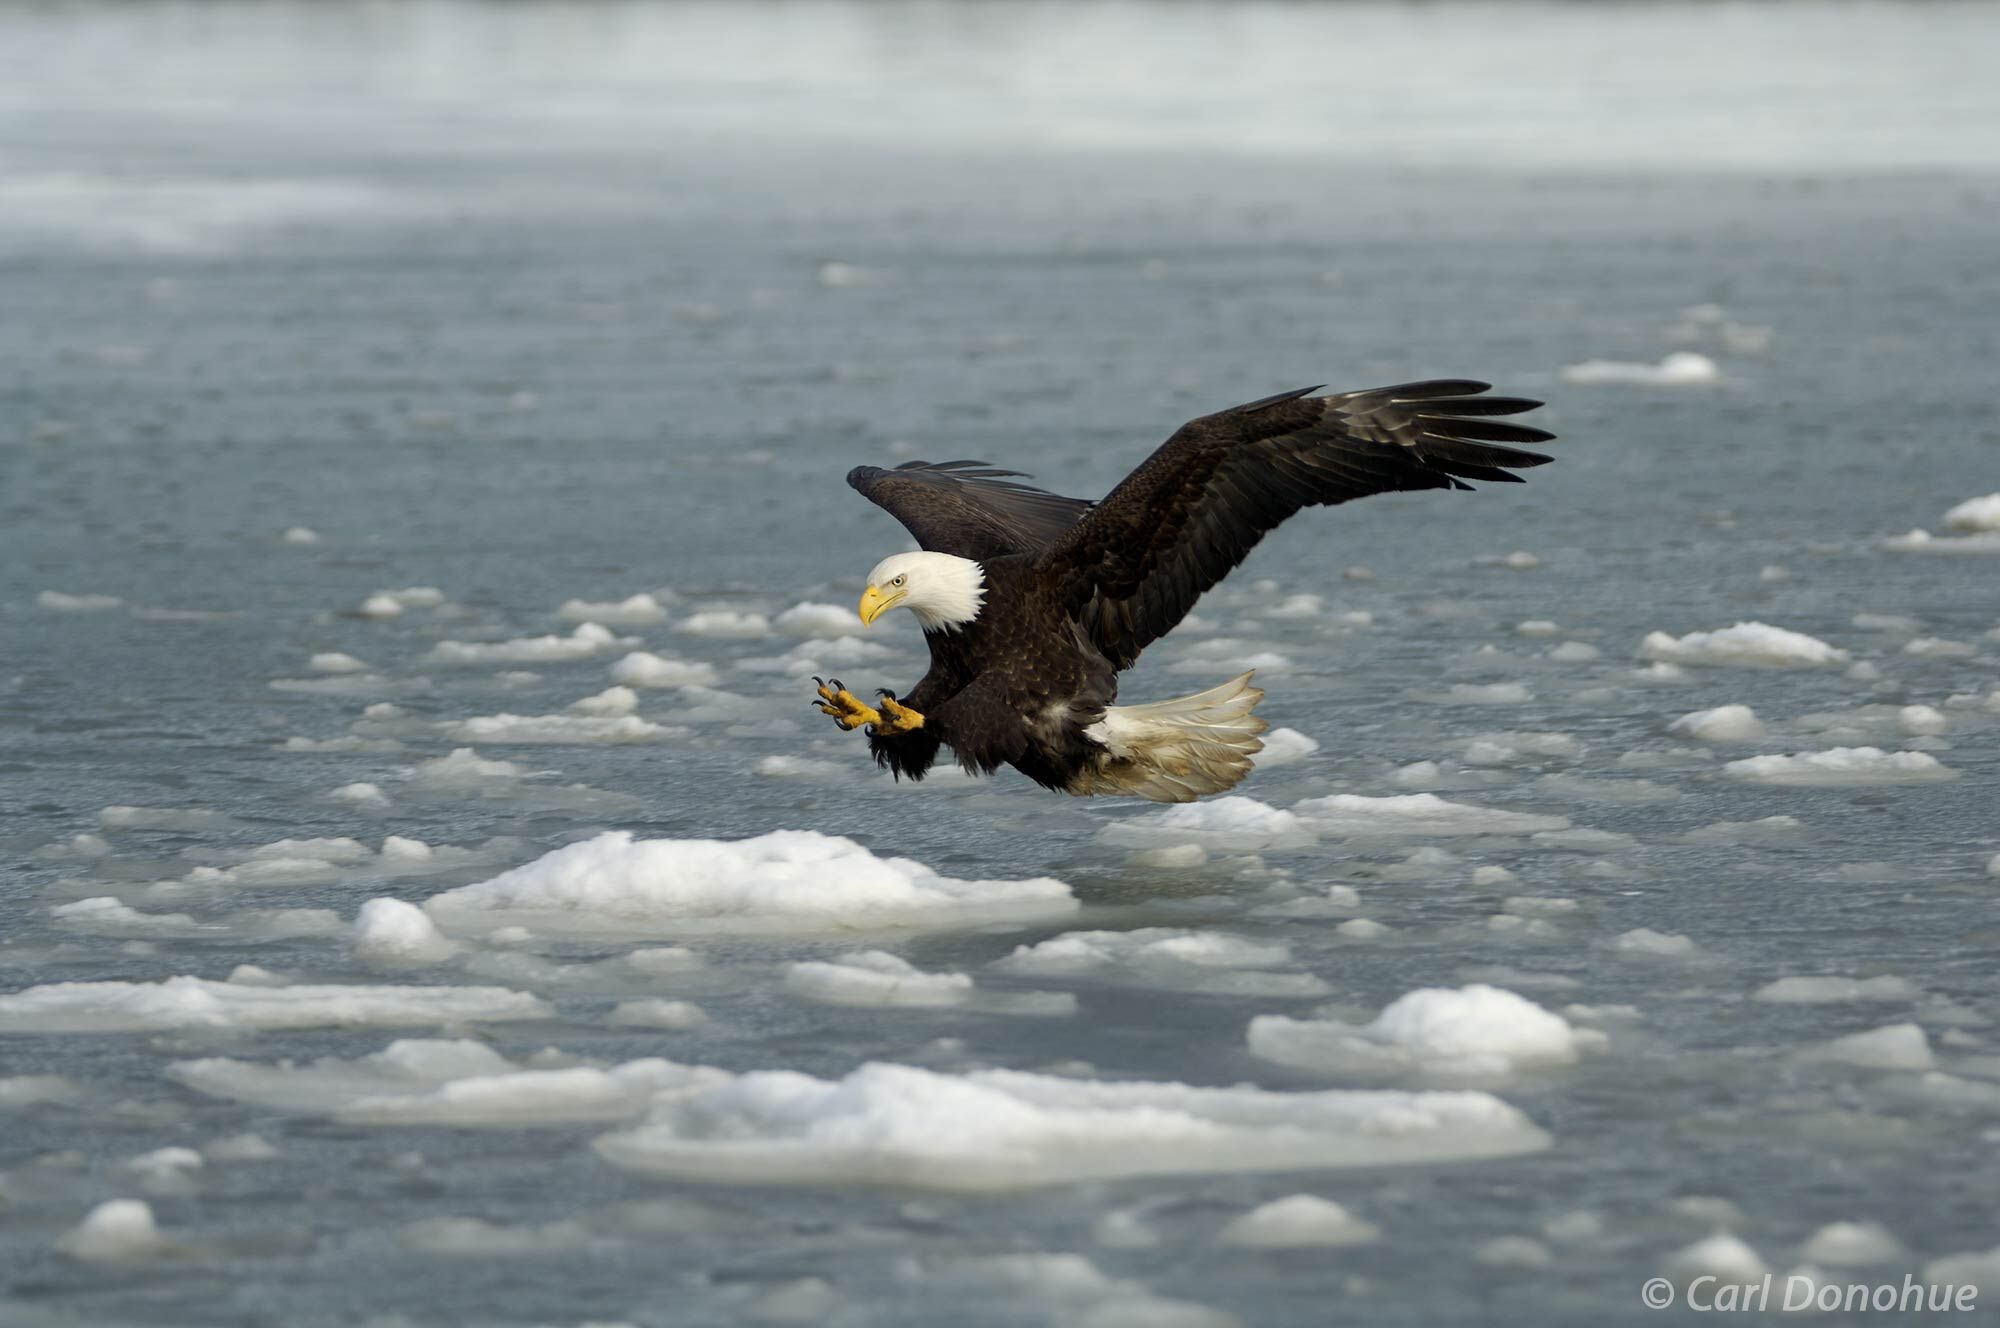 An adult bald eagle gracefully swoops down among the icebergs to catch a fish in Kachemak Bay, Alaska. Bald eagle fishing in...